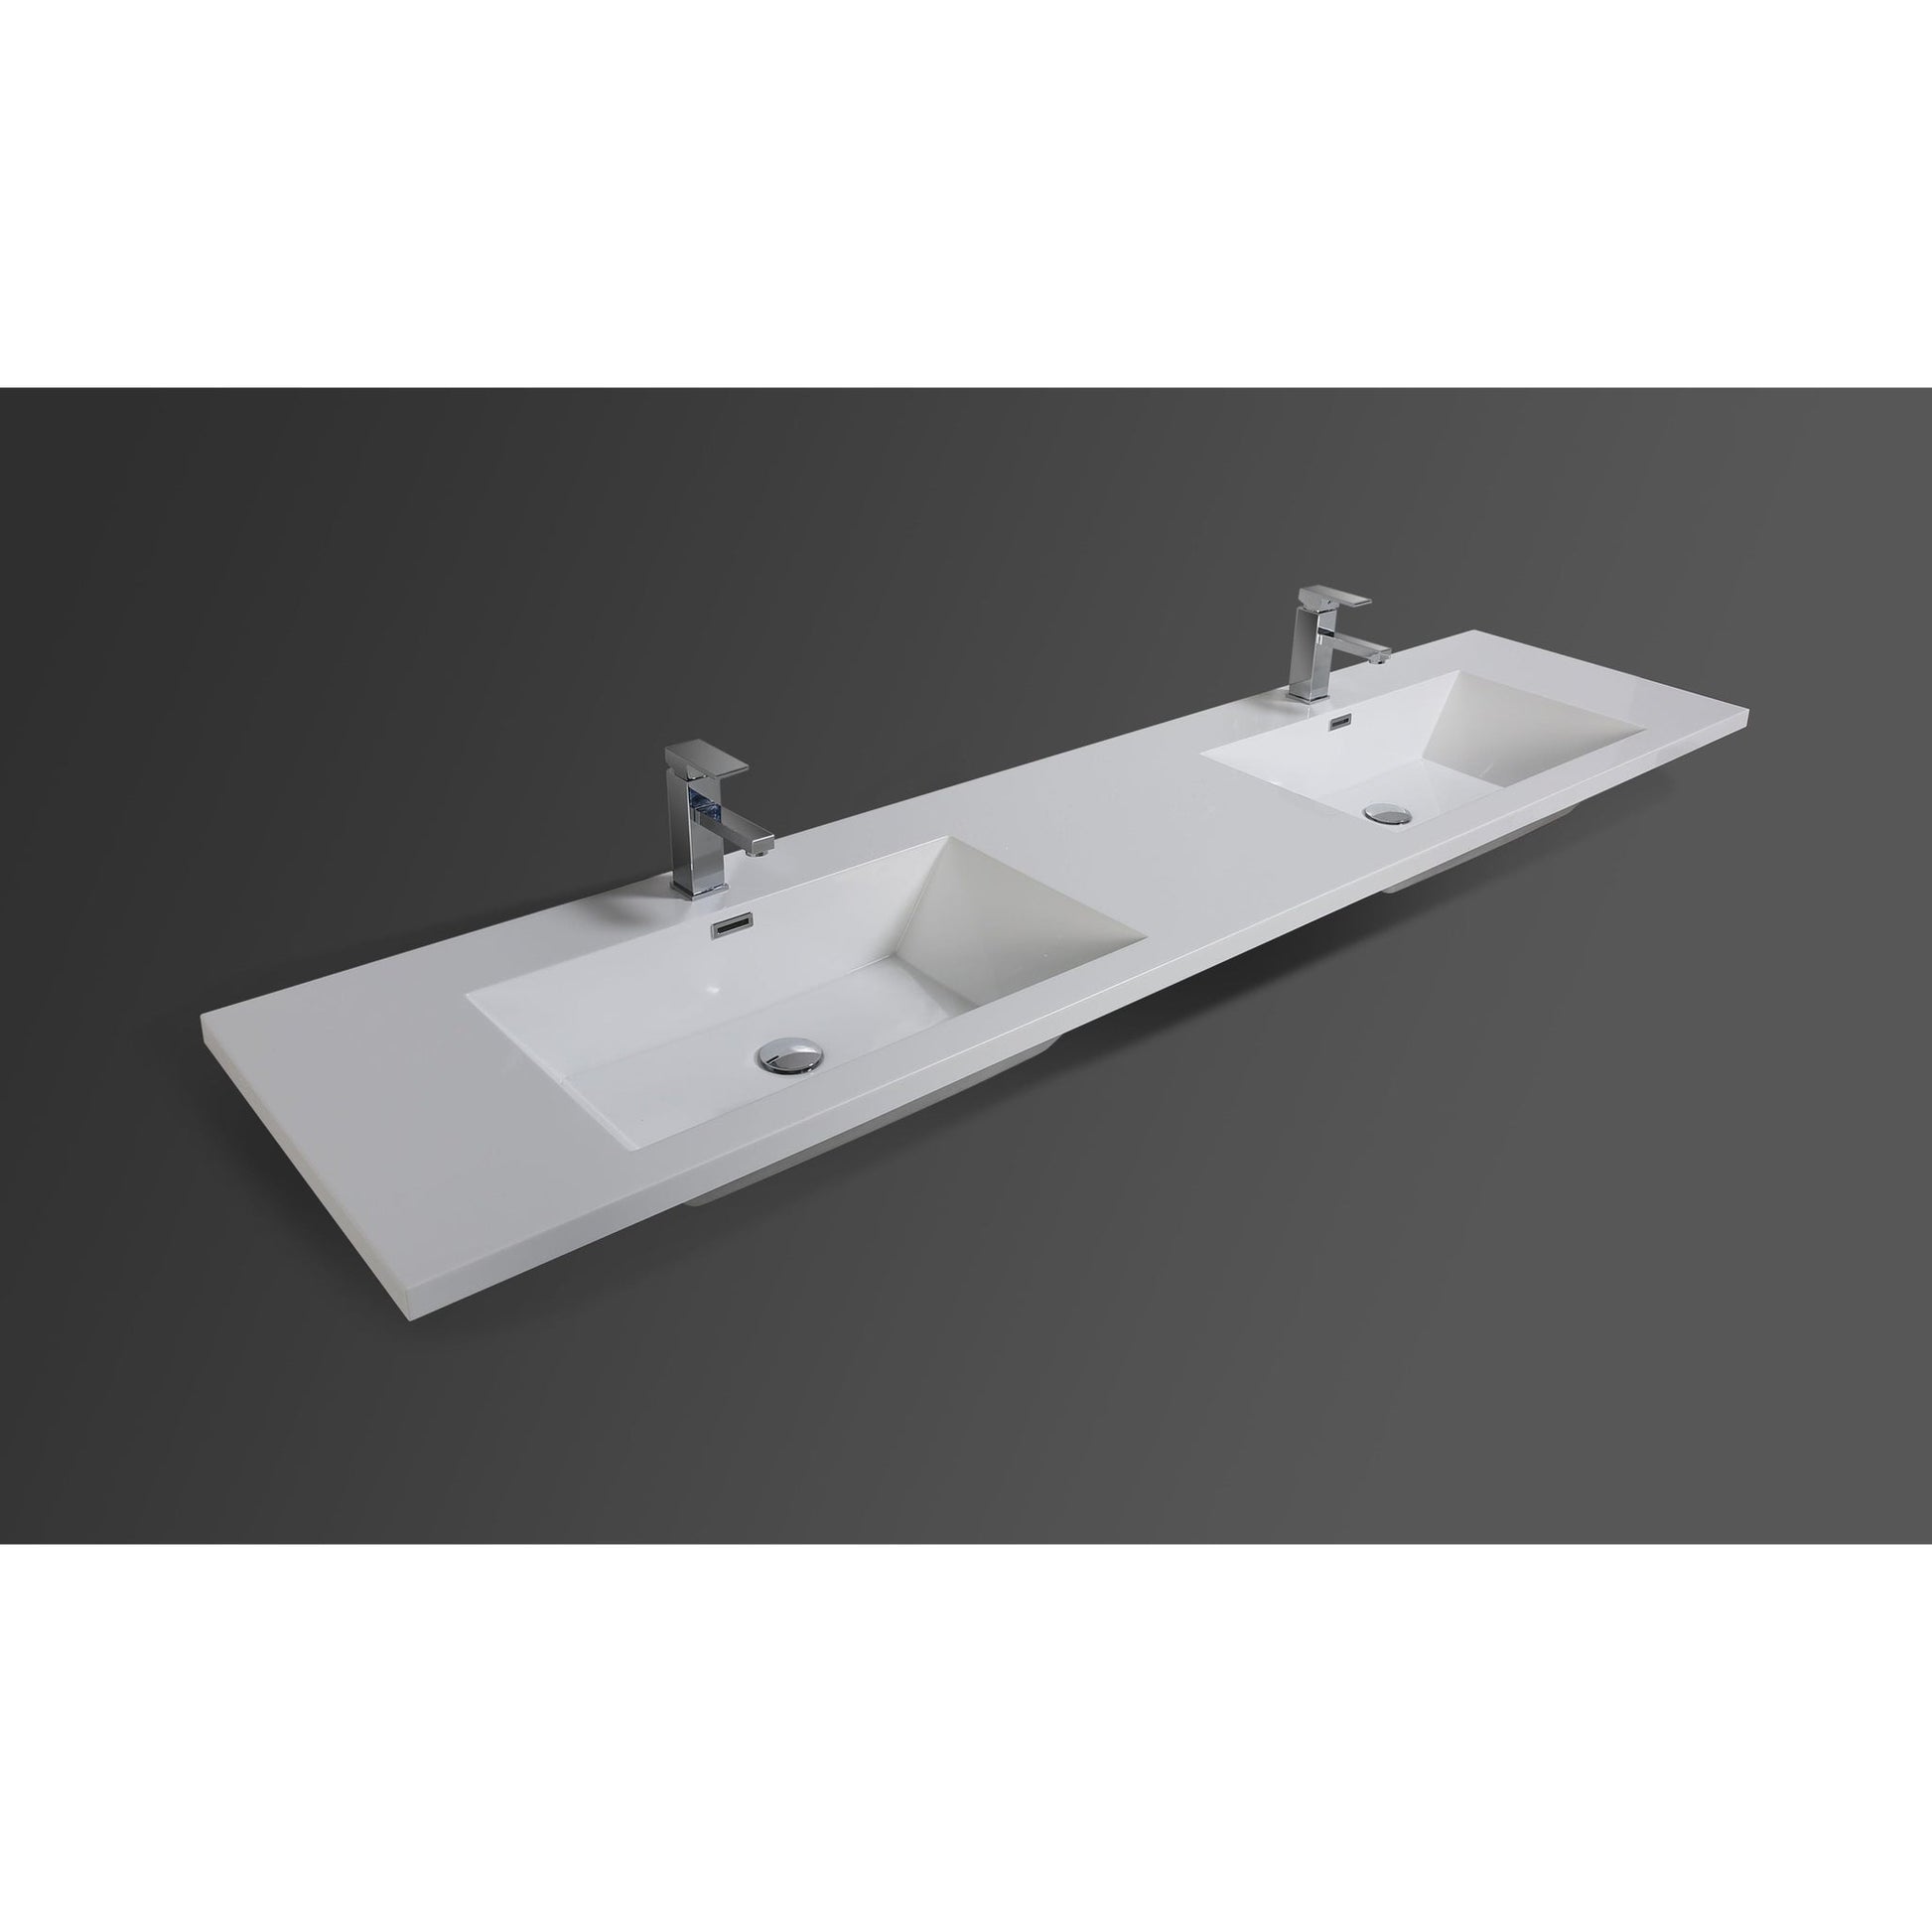 Moreno Bath Dolce 84" High Gloss White Freestanding Vanity With Double Reinforced White Acrylic Sinks